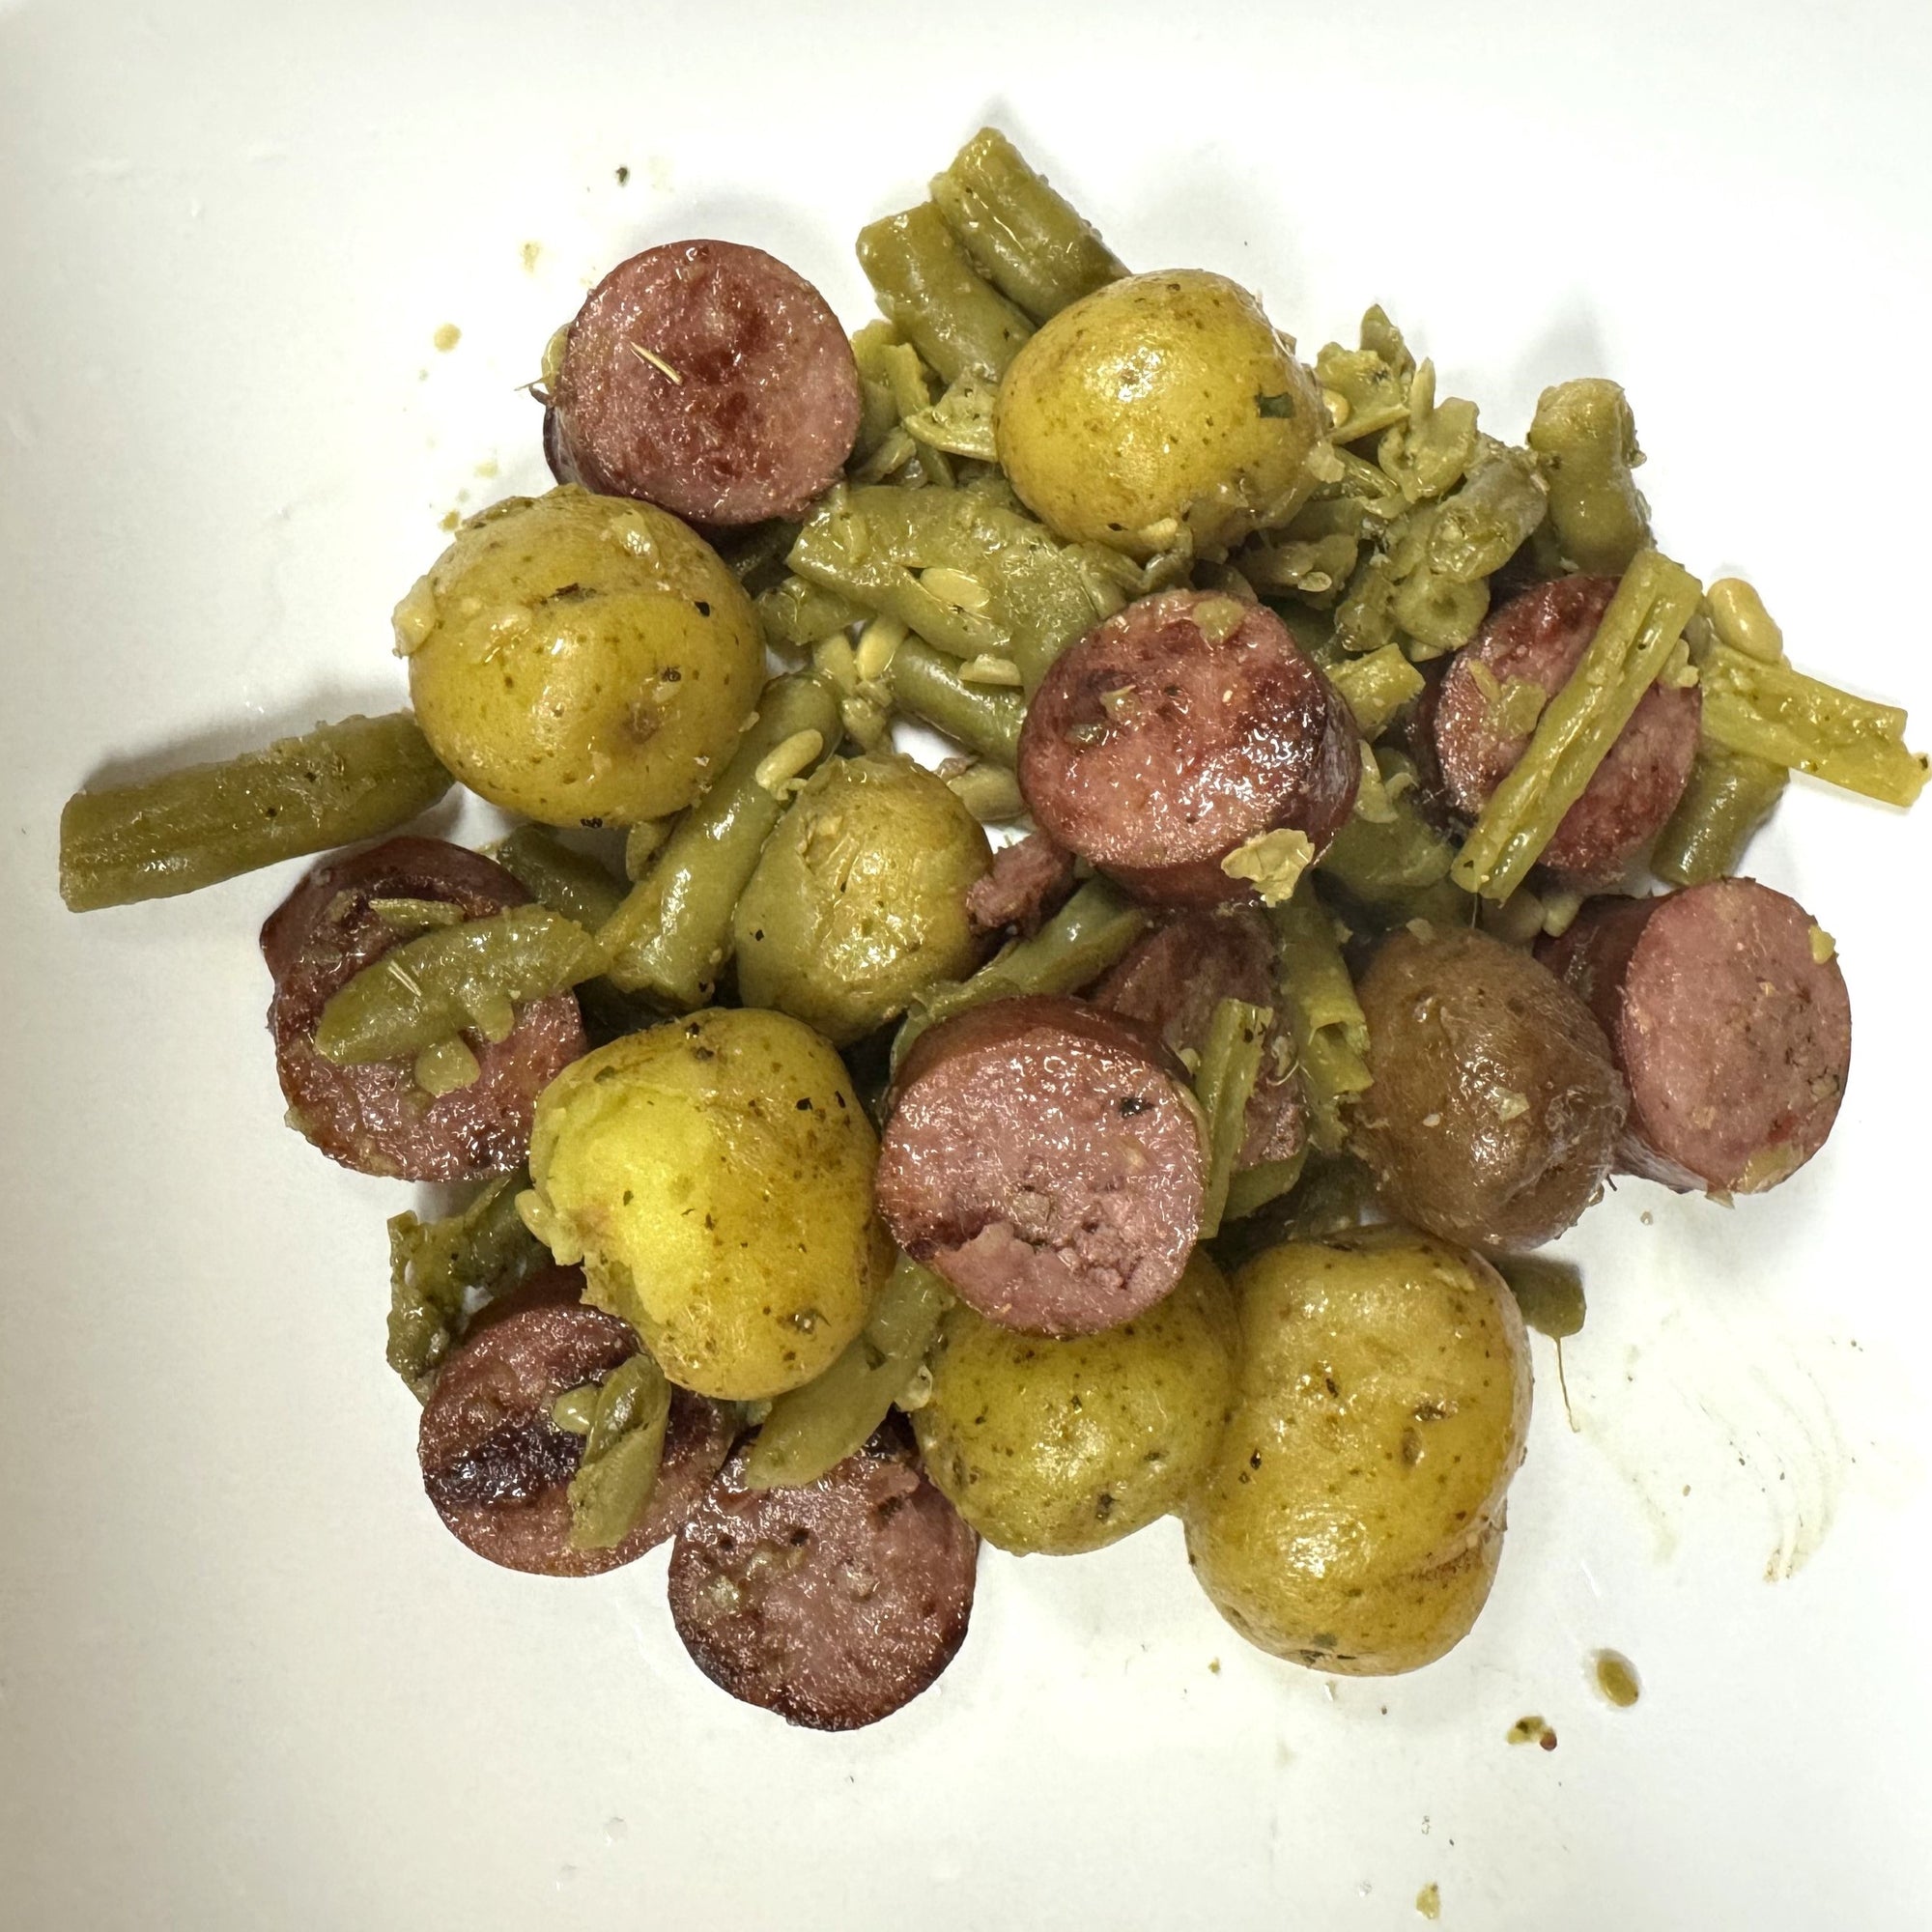 Bright Leaf Smoked Sausage with Potatoes and Green Beans